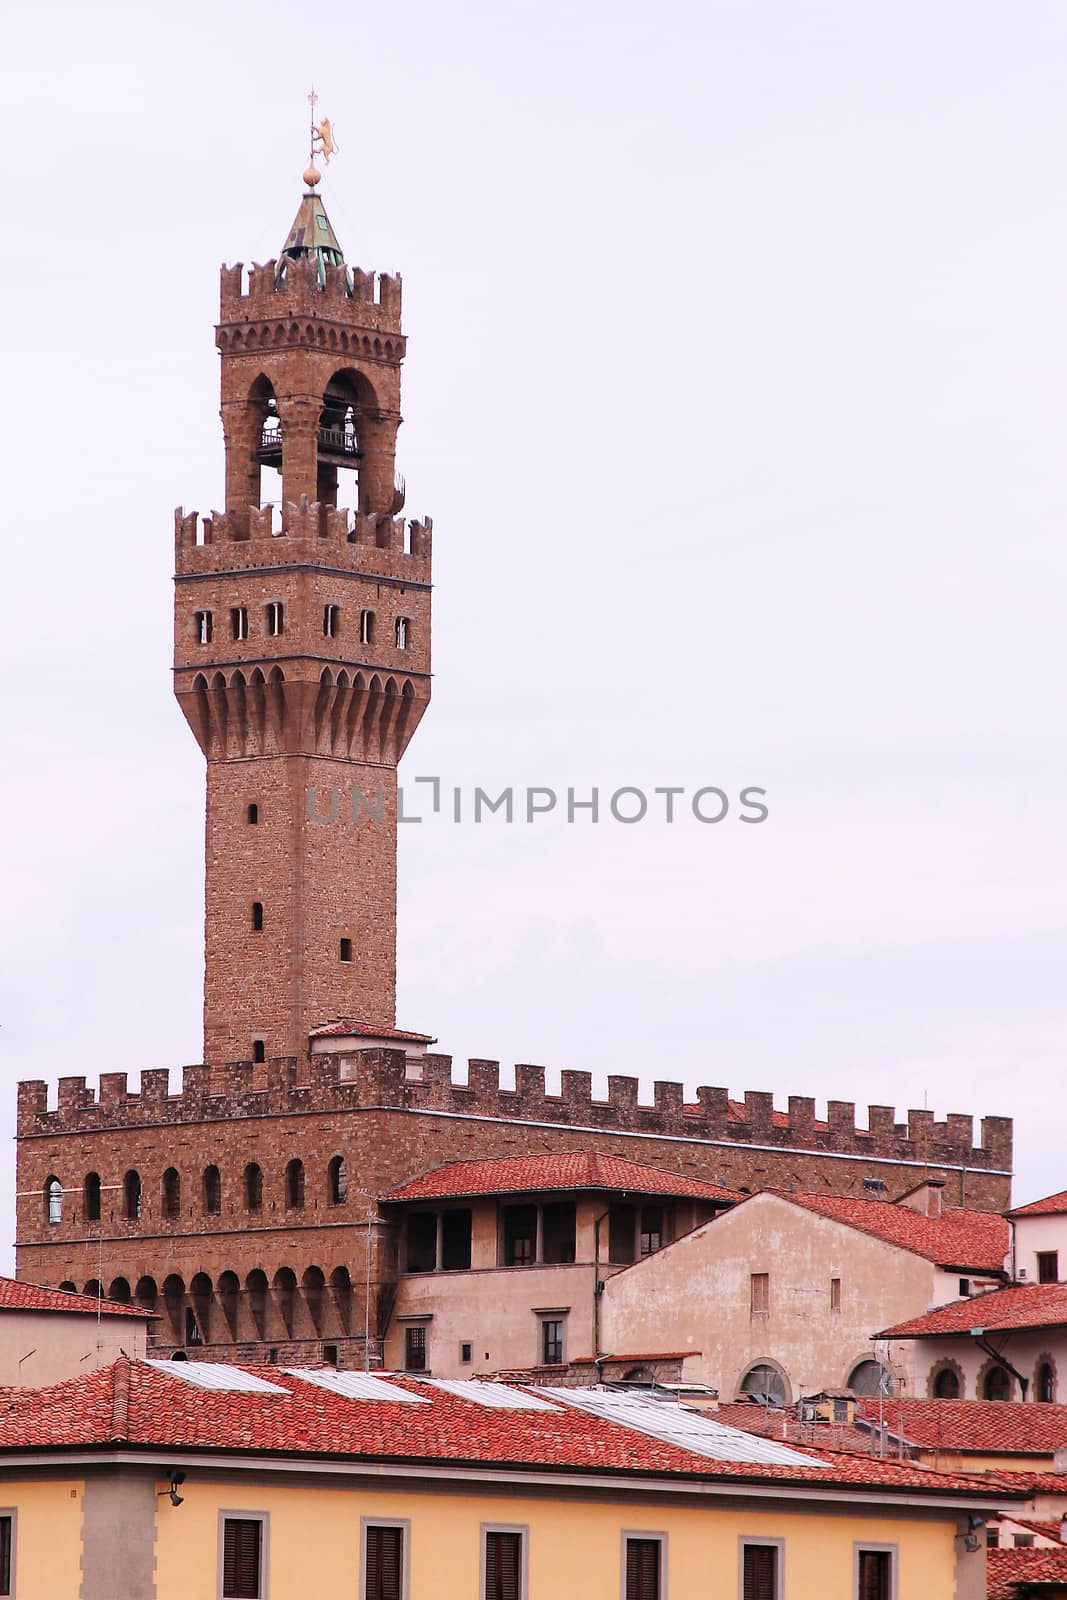 Palazzo Vecchio � Old Palace � in Florence, Italy by cristiaciobanu